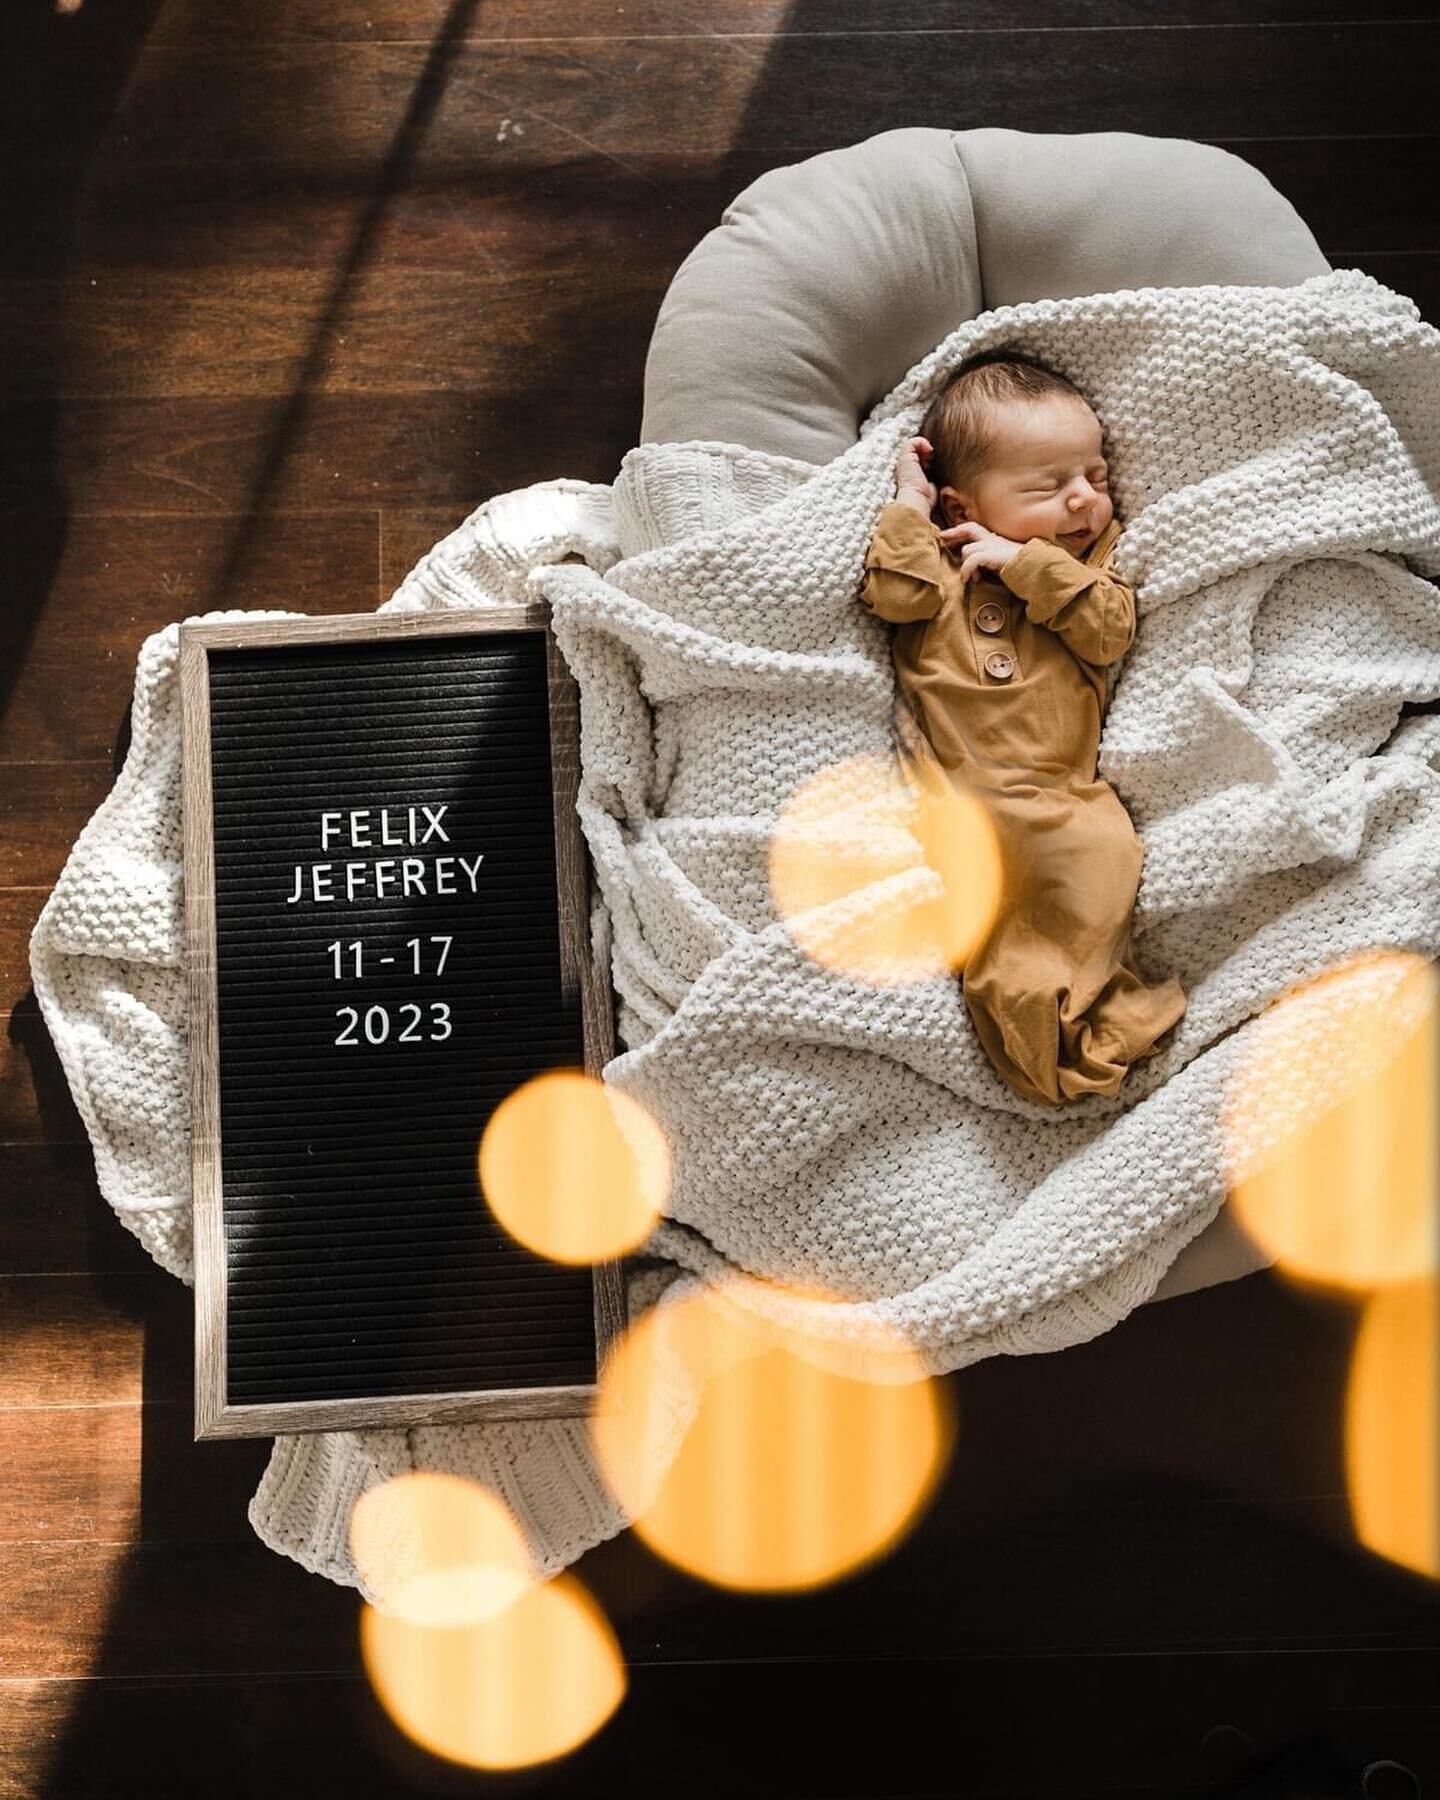 🤍 He&rsquo;s here!🤍 our son Felix Jeffrey was born November 17th at 9:51 am! Everyone&rsquo;s healthy and well, I am in full blissed-out newborn mode, and his big brother and sister treat him like a celebrity every time he comes into the room. I&rs